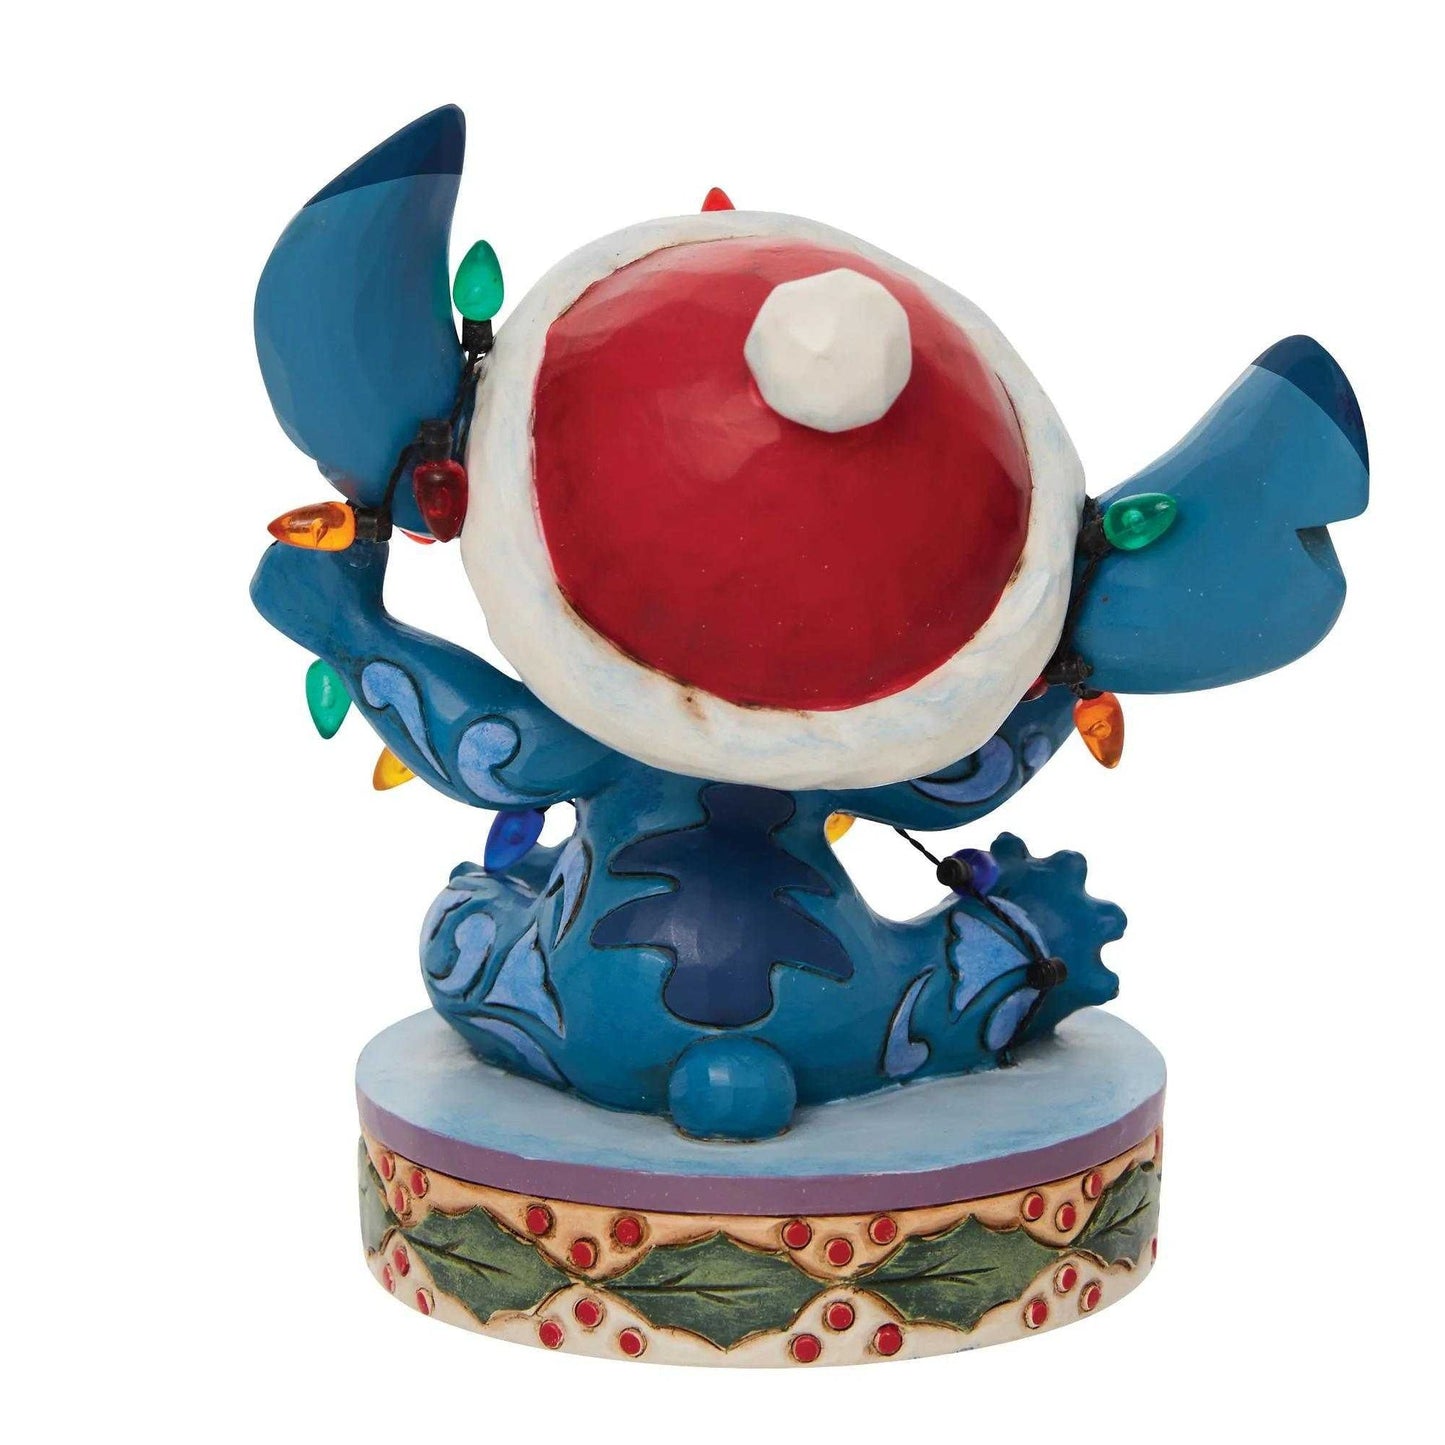 Jim Shore Disney Traditions Lilo and Stitch Wrapped in Christmas Figurine, 4.5 Inch